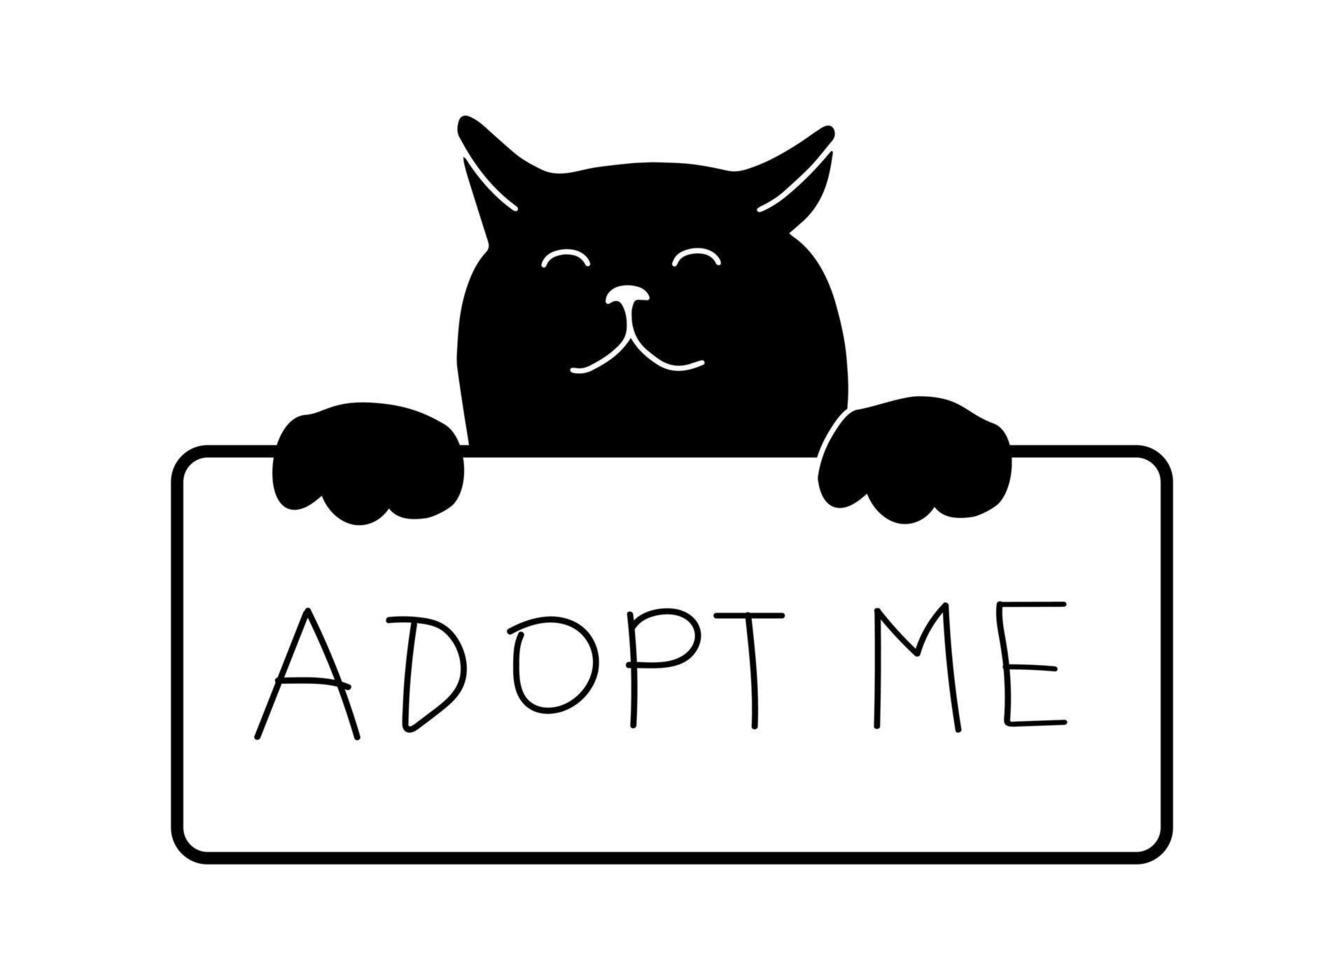 Cute cat face with banner, adopt me phrase, conceptual illustration isolated on white background. Doodle vector drawing. Rescue abandoned pet in shelter.